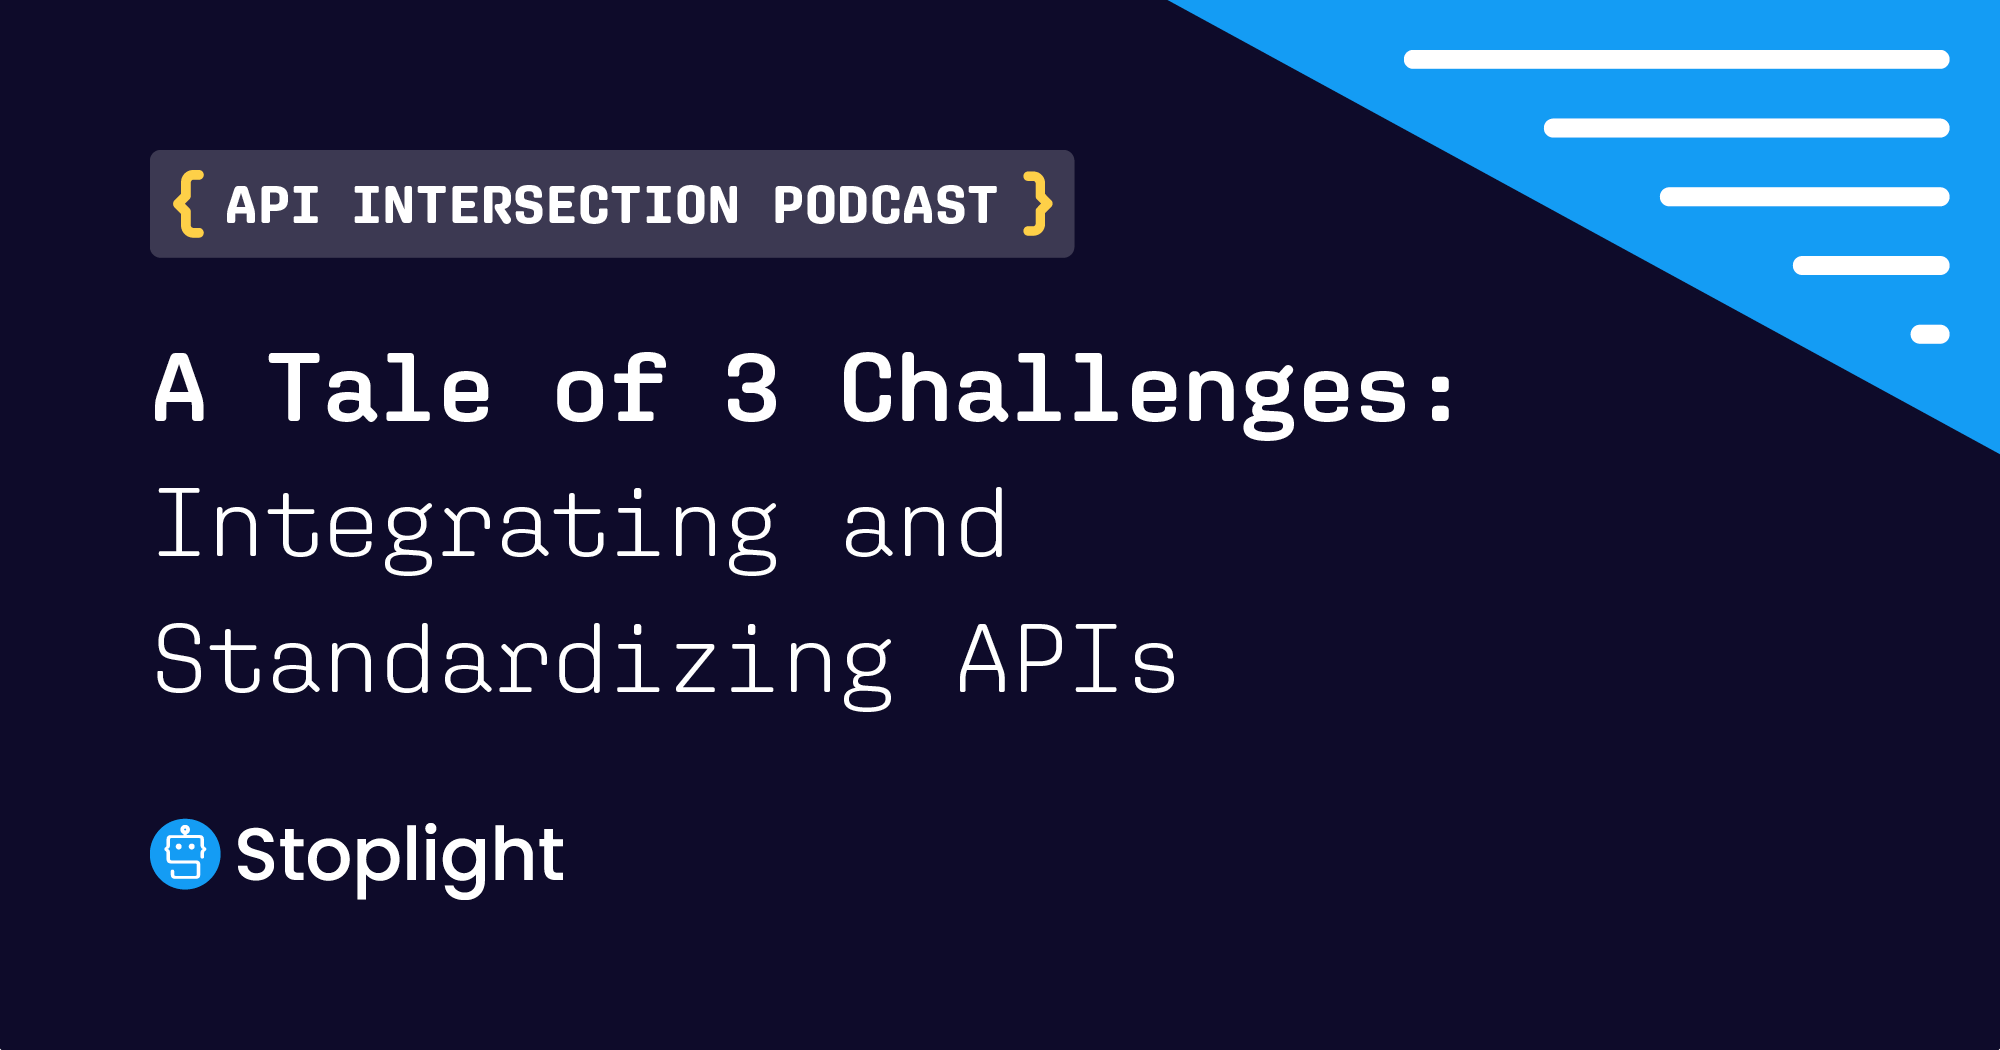 A Tale of 3 Challenges: Integrating and Standardizing APIs